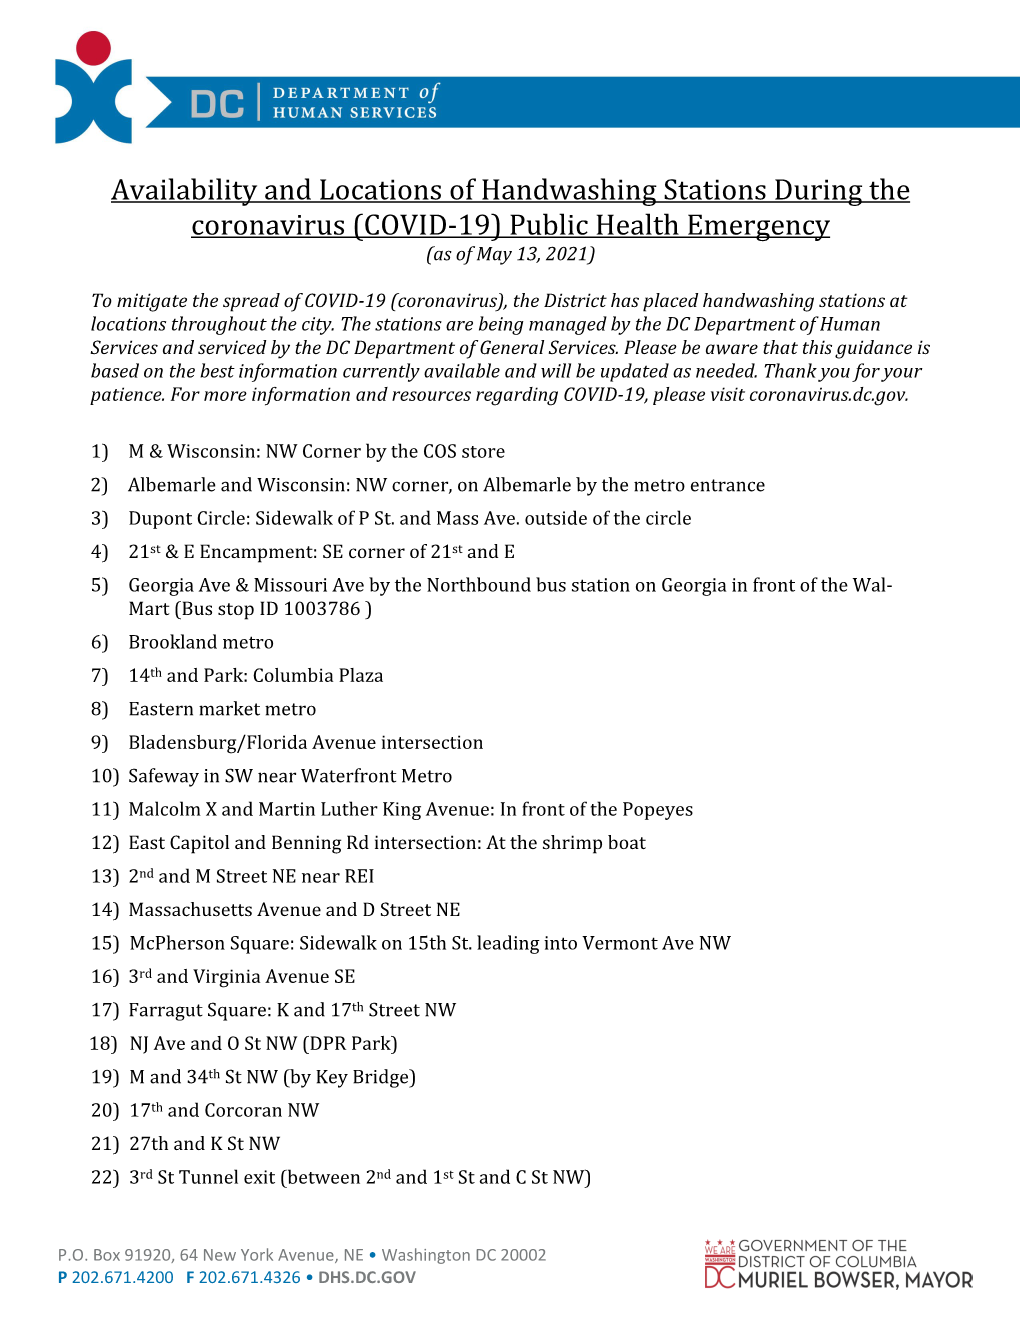 Availability and Locations of Handwashing Stations During the Coronavirus (COVID-19) Public Health Emergency (As of May 13, 2021)